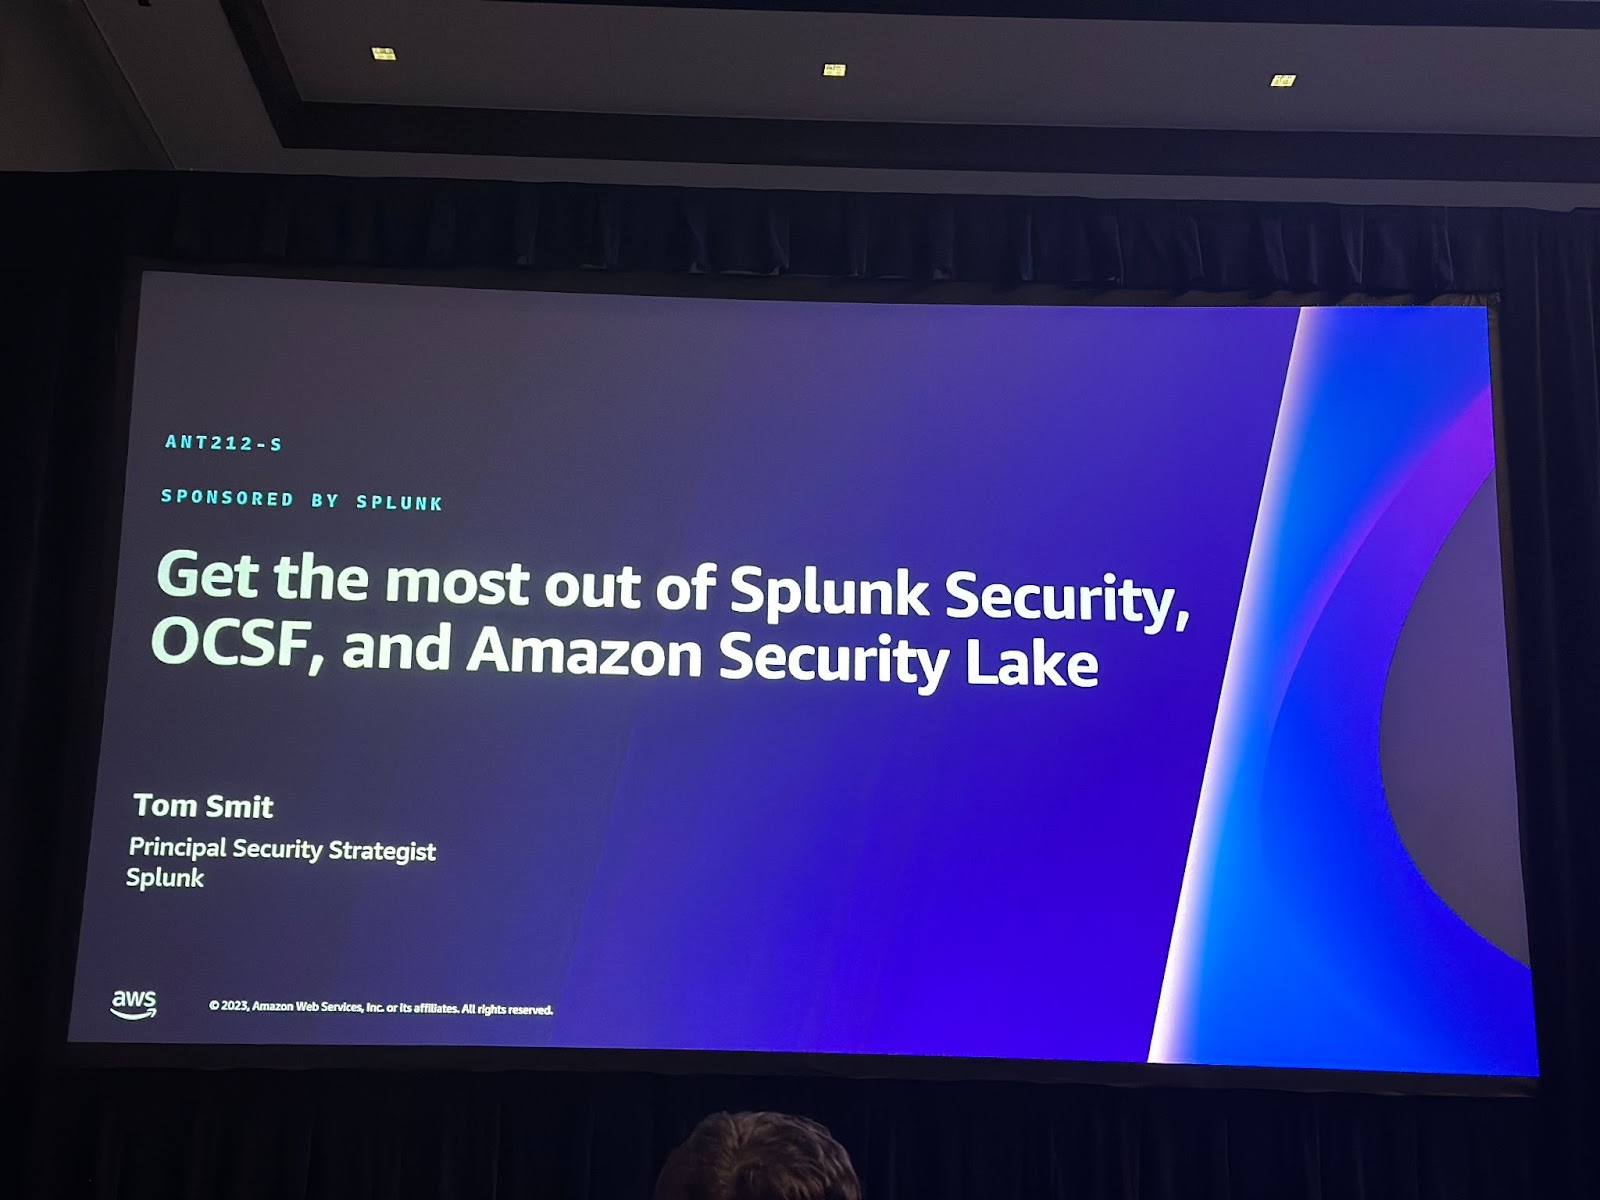 Get the most out of Splunk Security, OCSF, and Amazon Security Lake (sponsored by Splunk)